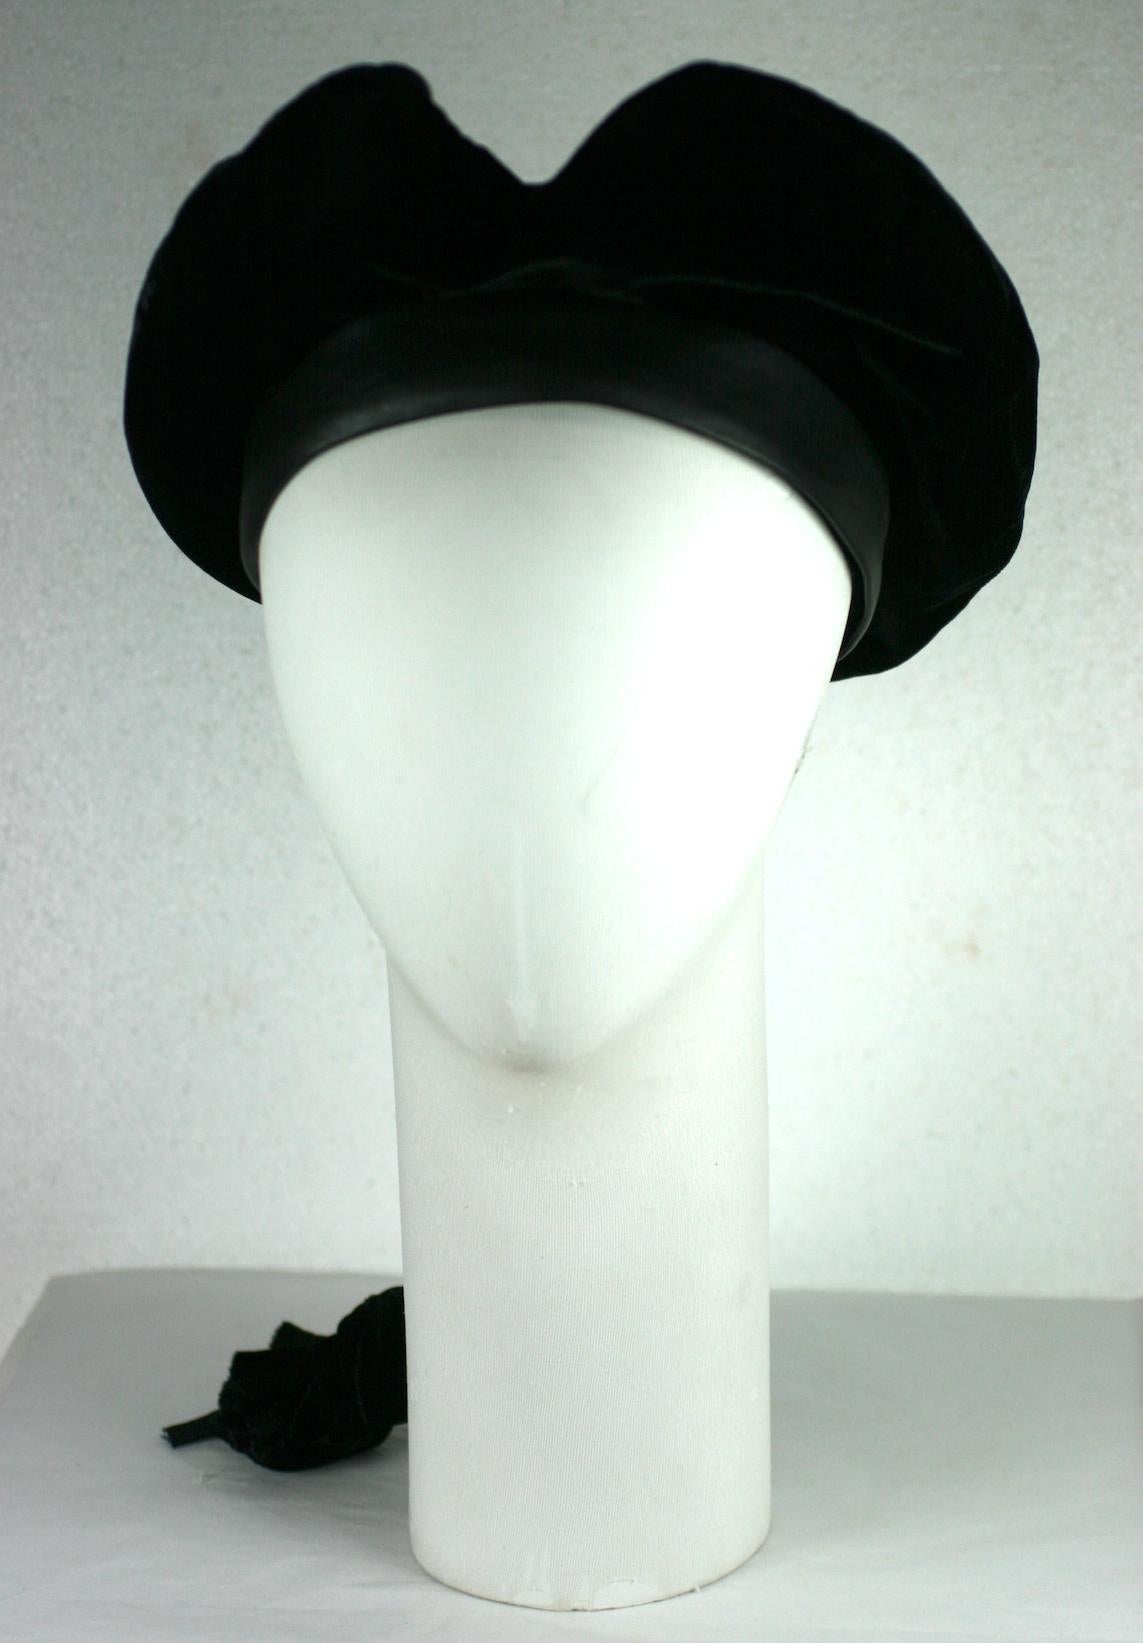 Karl Lagerfeld Velvet Beret with Self Braid from the 1980's. Charming beret with 